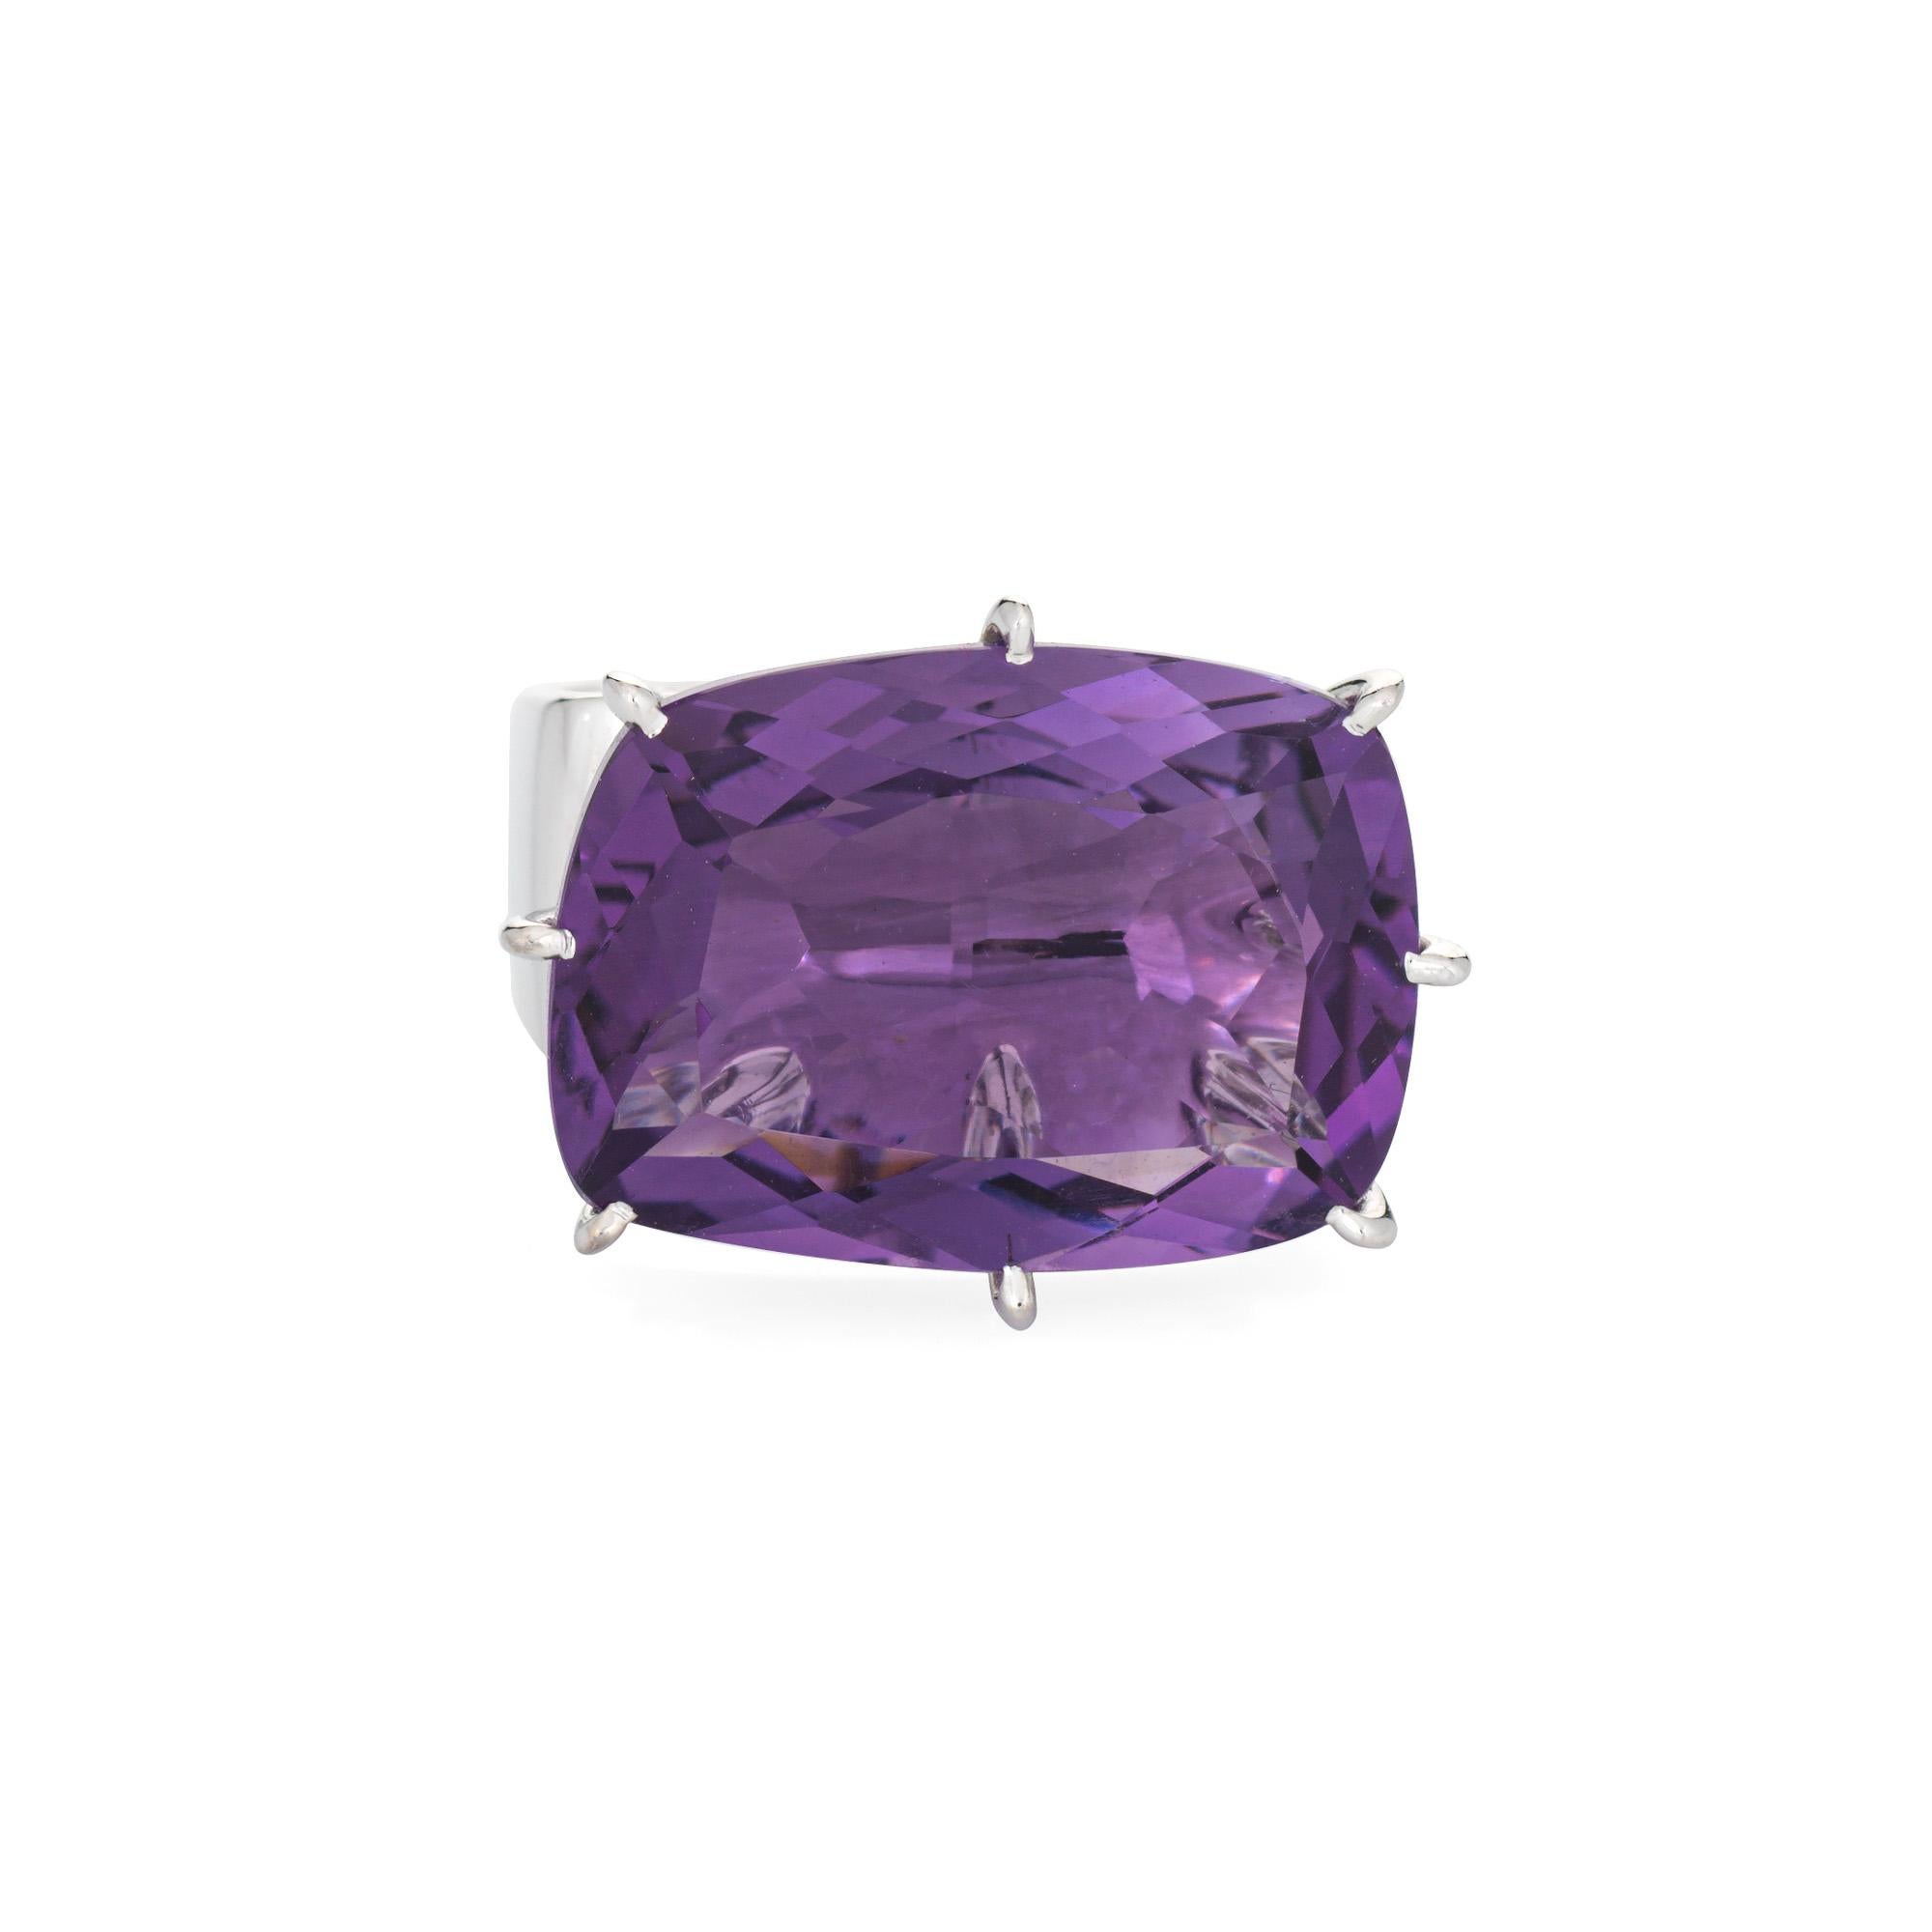 Stylish H Stern Amethyst & diamond ring crafted in 18 karat white gold. 

Cushion cut amethyst is estimated at 10.50 carats. The amethyst is in excellent condition and free of cracks or chips. One estimated 0.03 carat princess cut diamond is set to